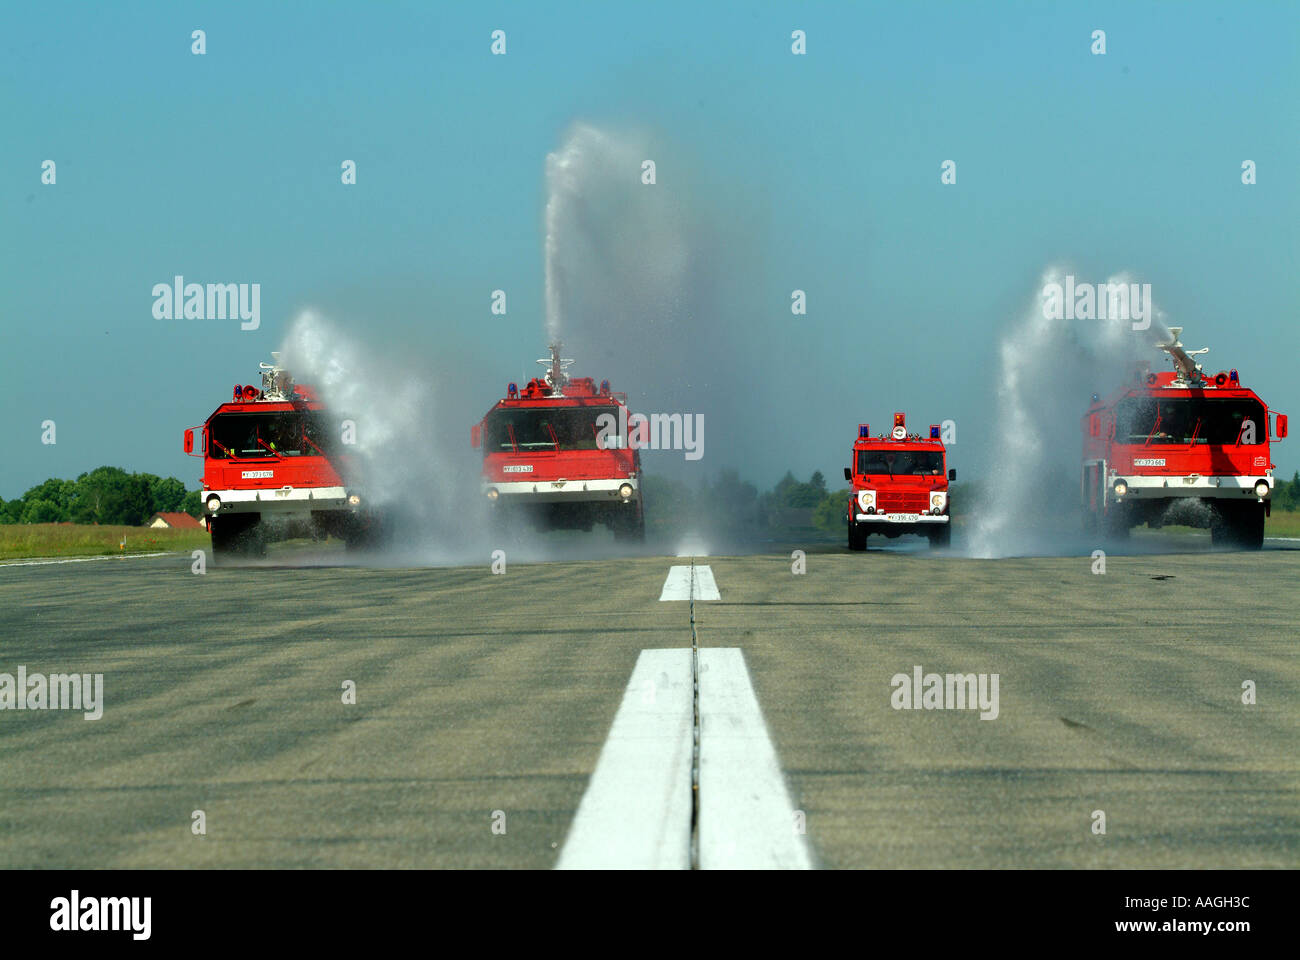 Rescue exercise of the airport fire service of the german airforce on the runway Stock Photo